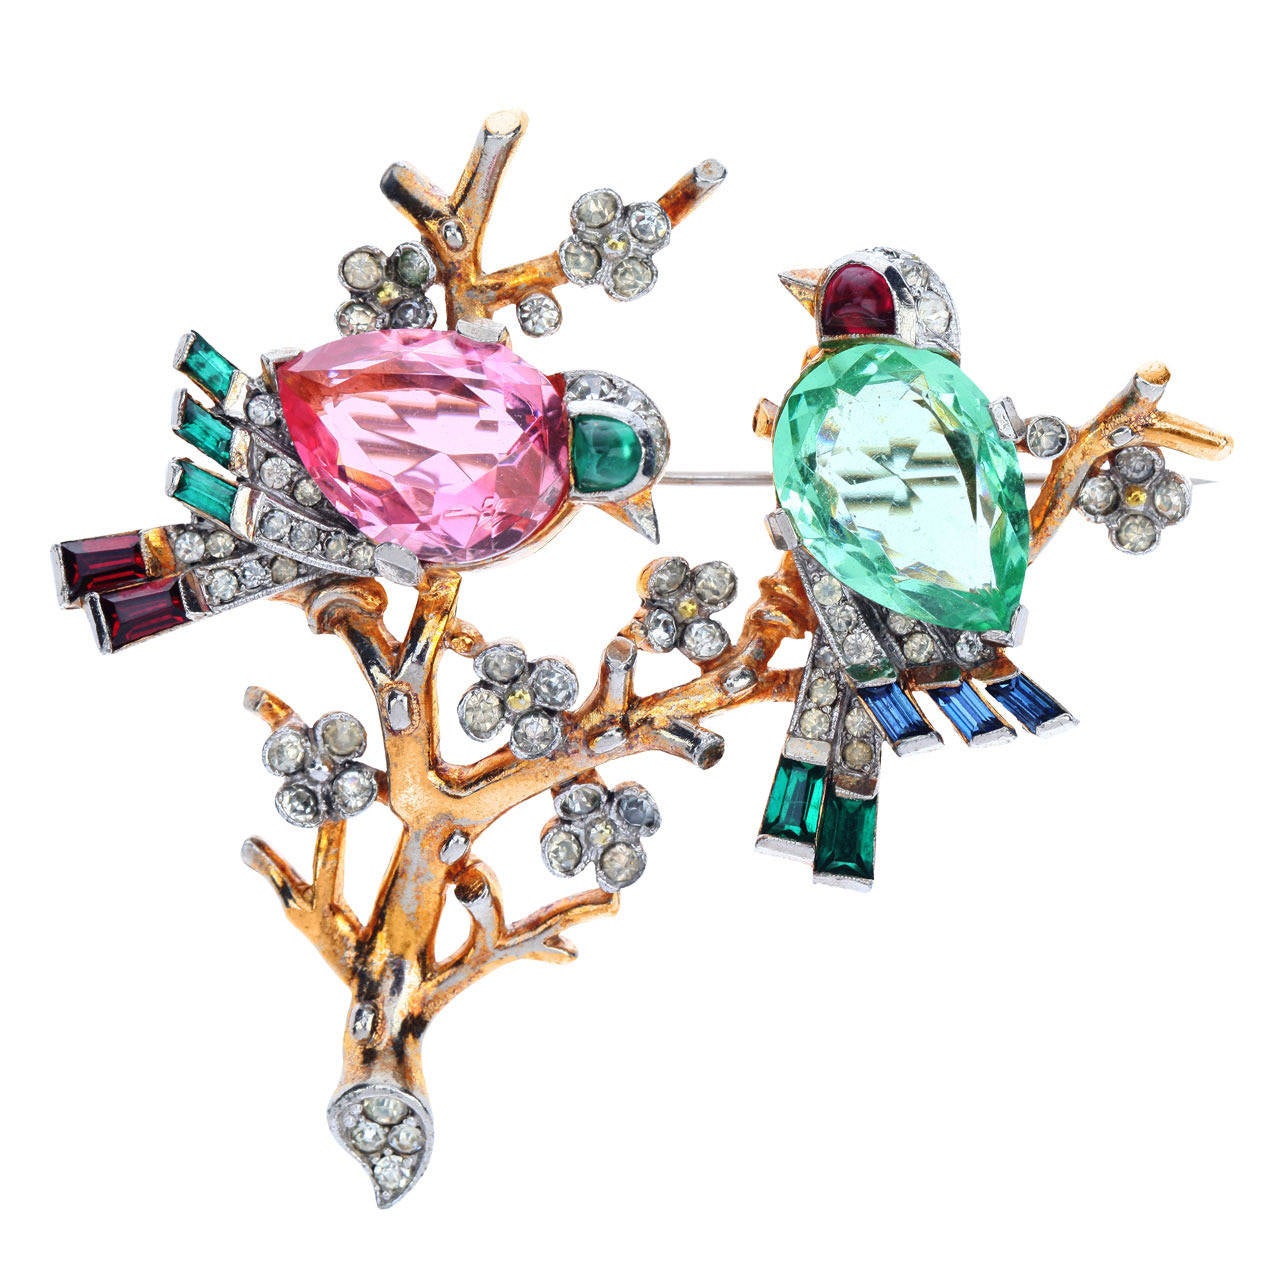 Vintage “Two Birds on a Branch” Brooch by Trifari